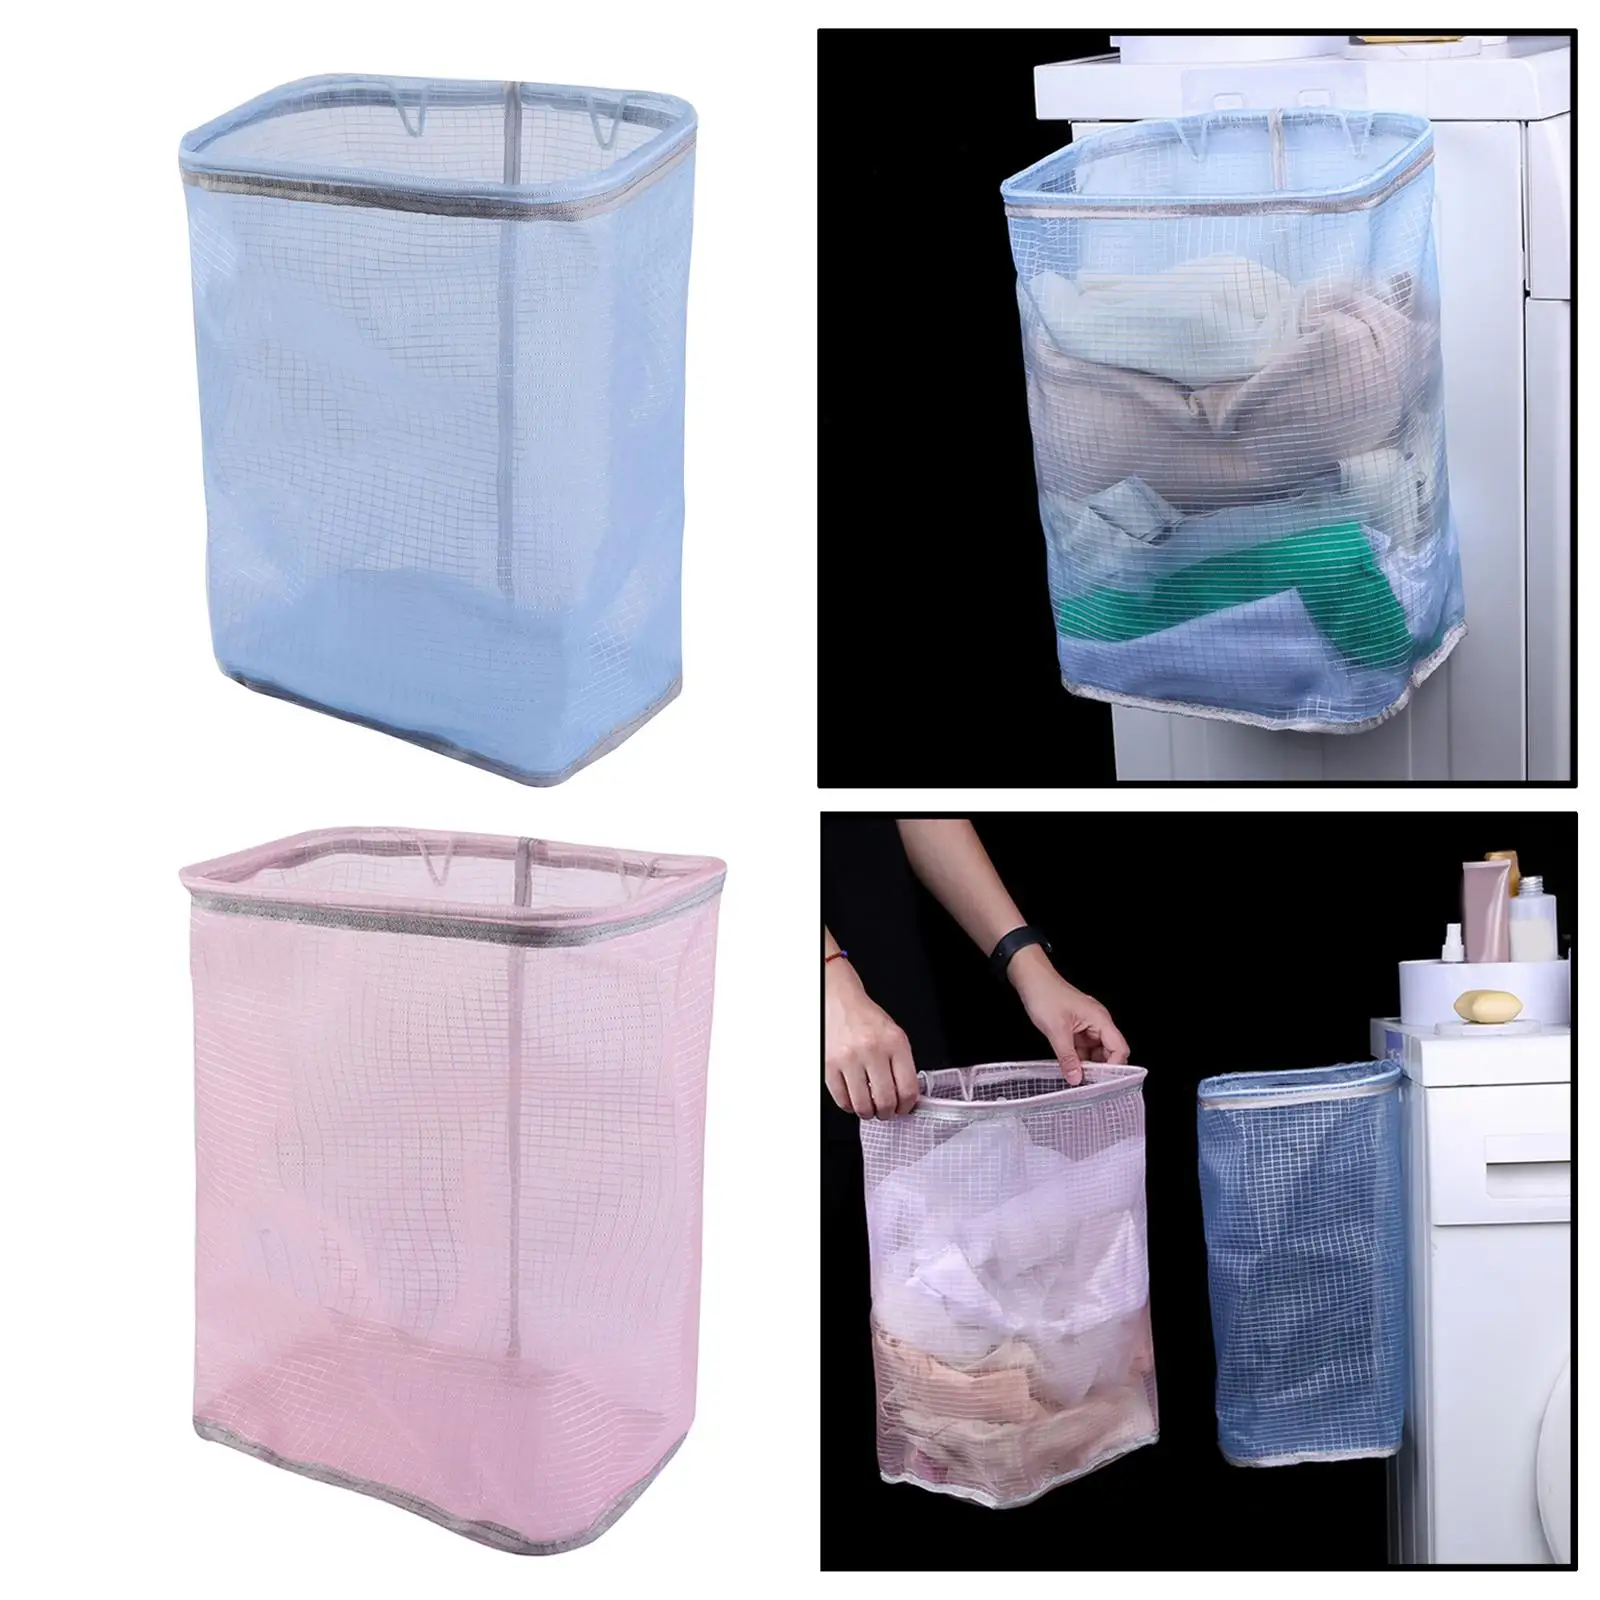 Collapsible Laundry Hamper Hanging Organizer Large Sized for Laundry Room